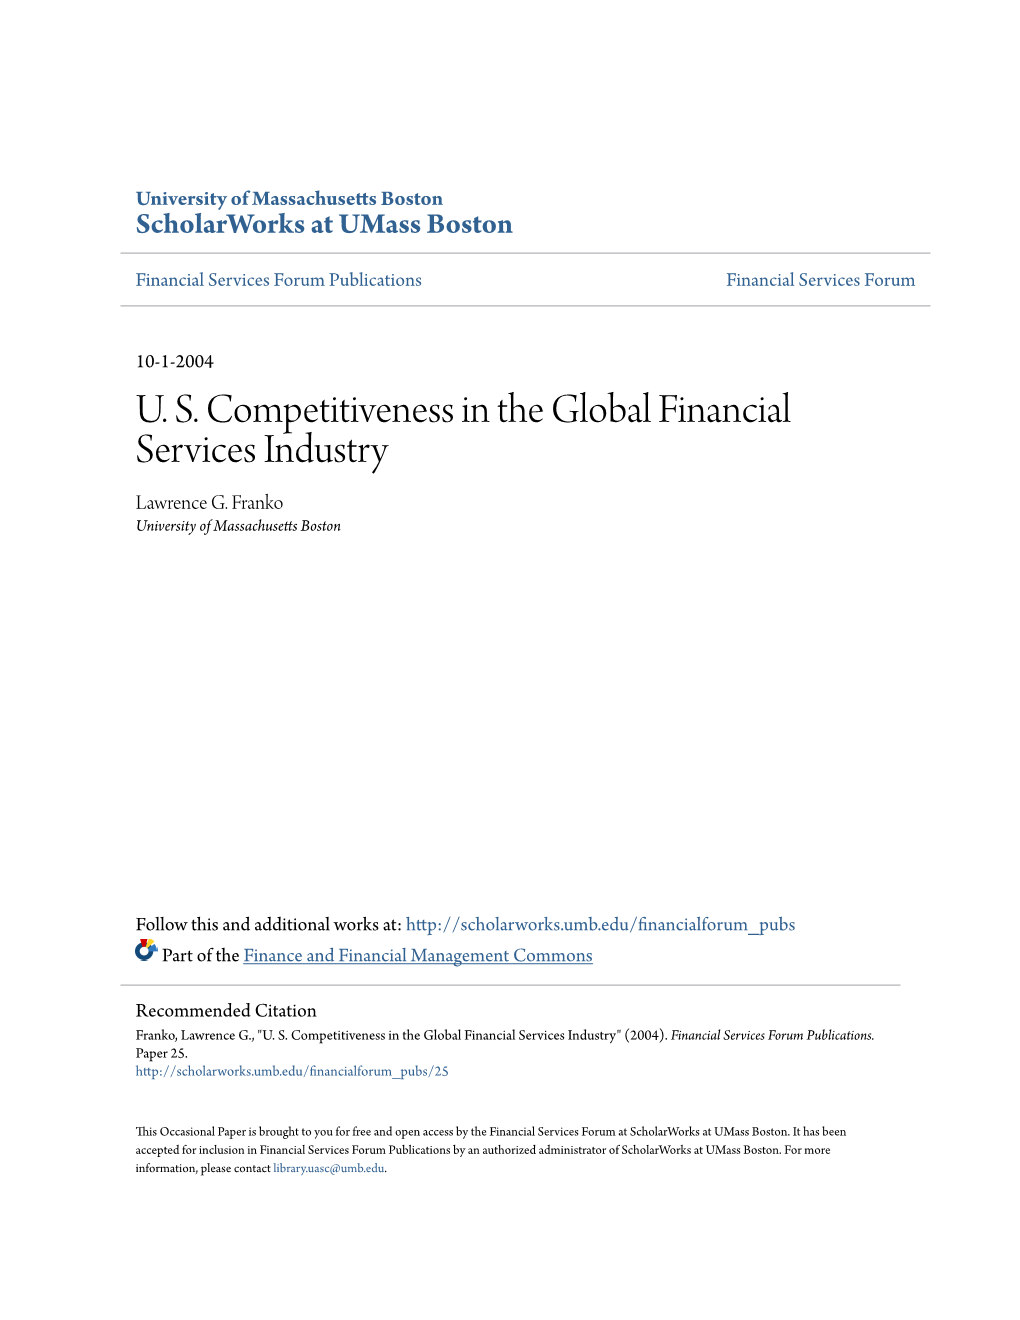 U. S. Competitiveness in the Global Financial Services Industry Lawrence G